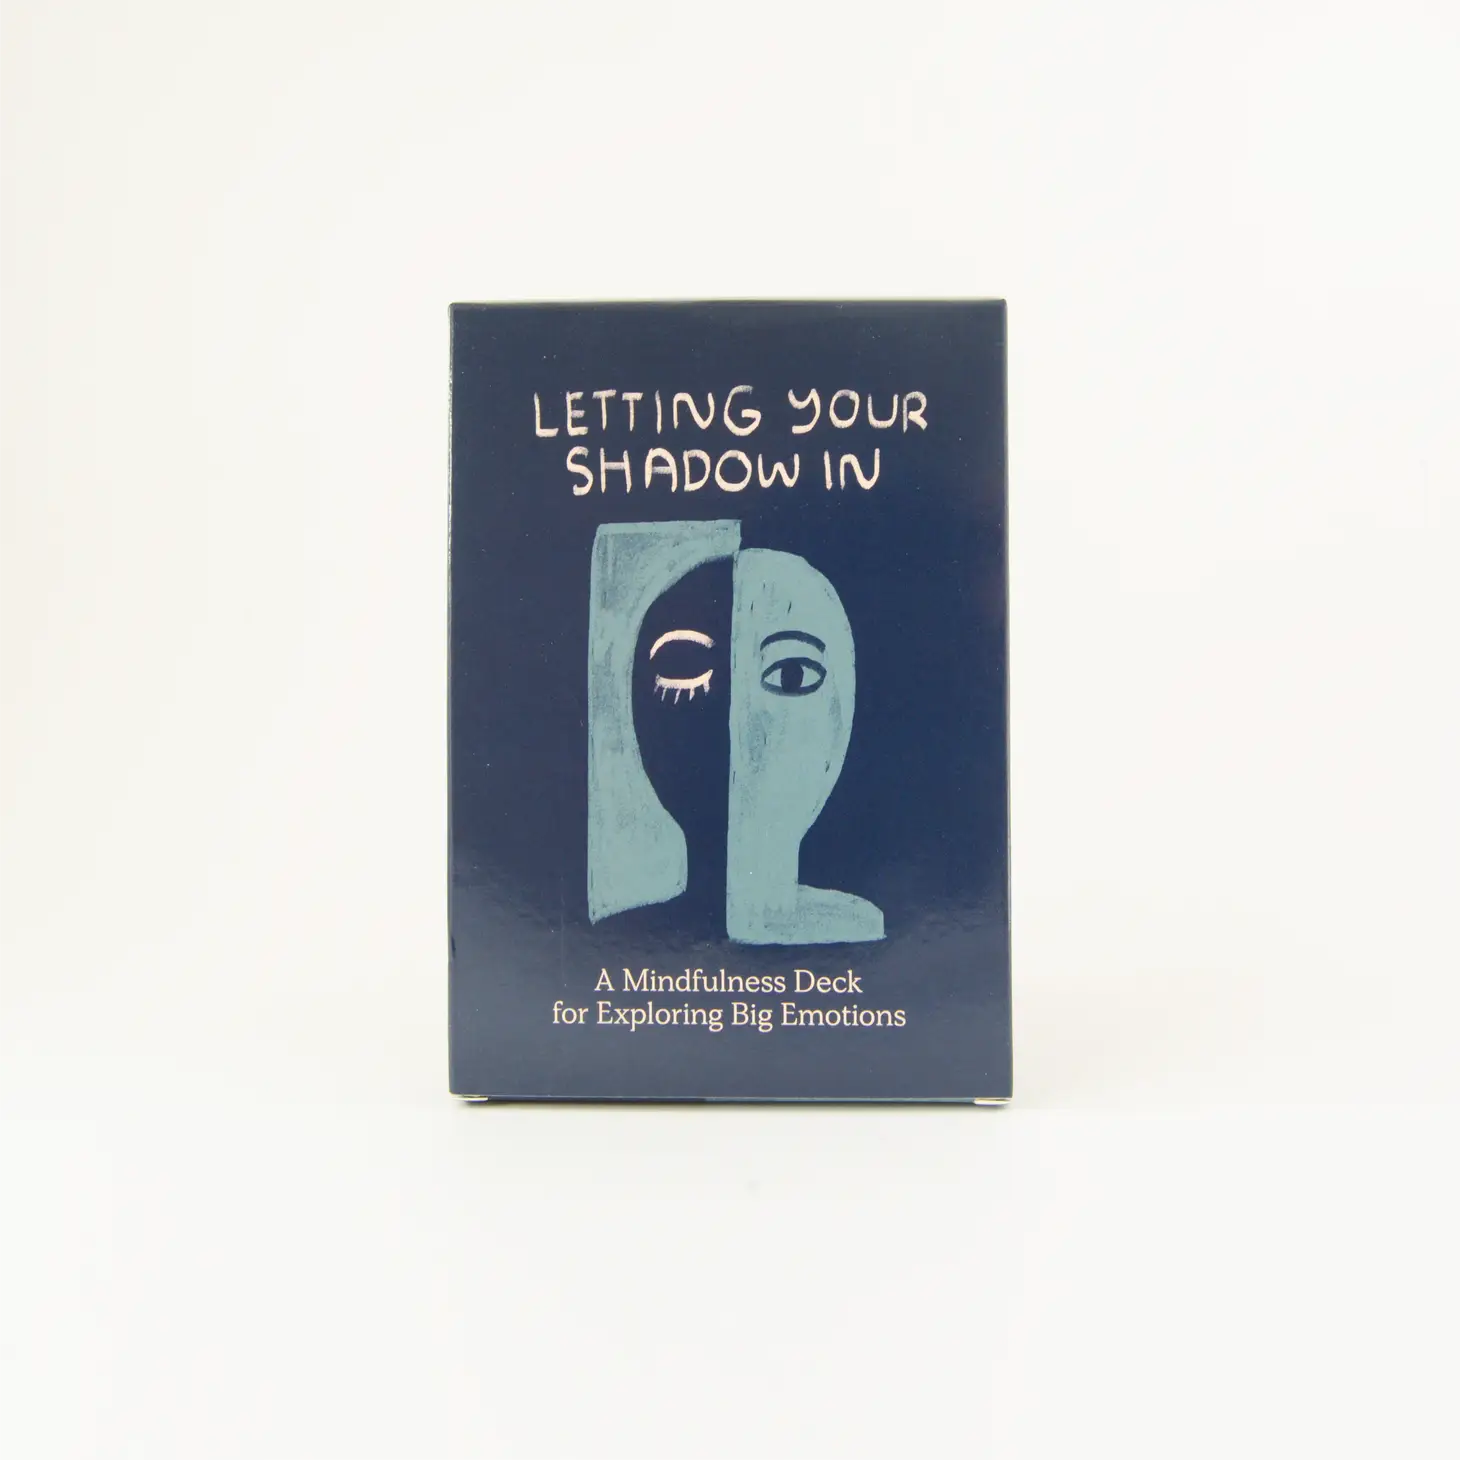 People I’ve Loved - Letting Your Shadow In Deck